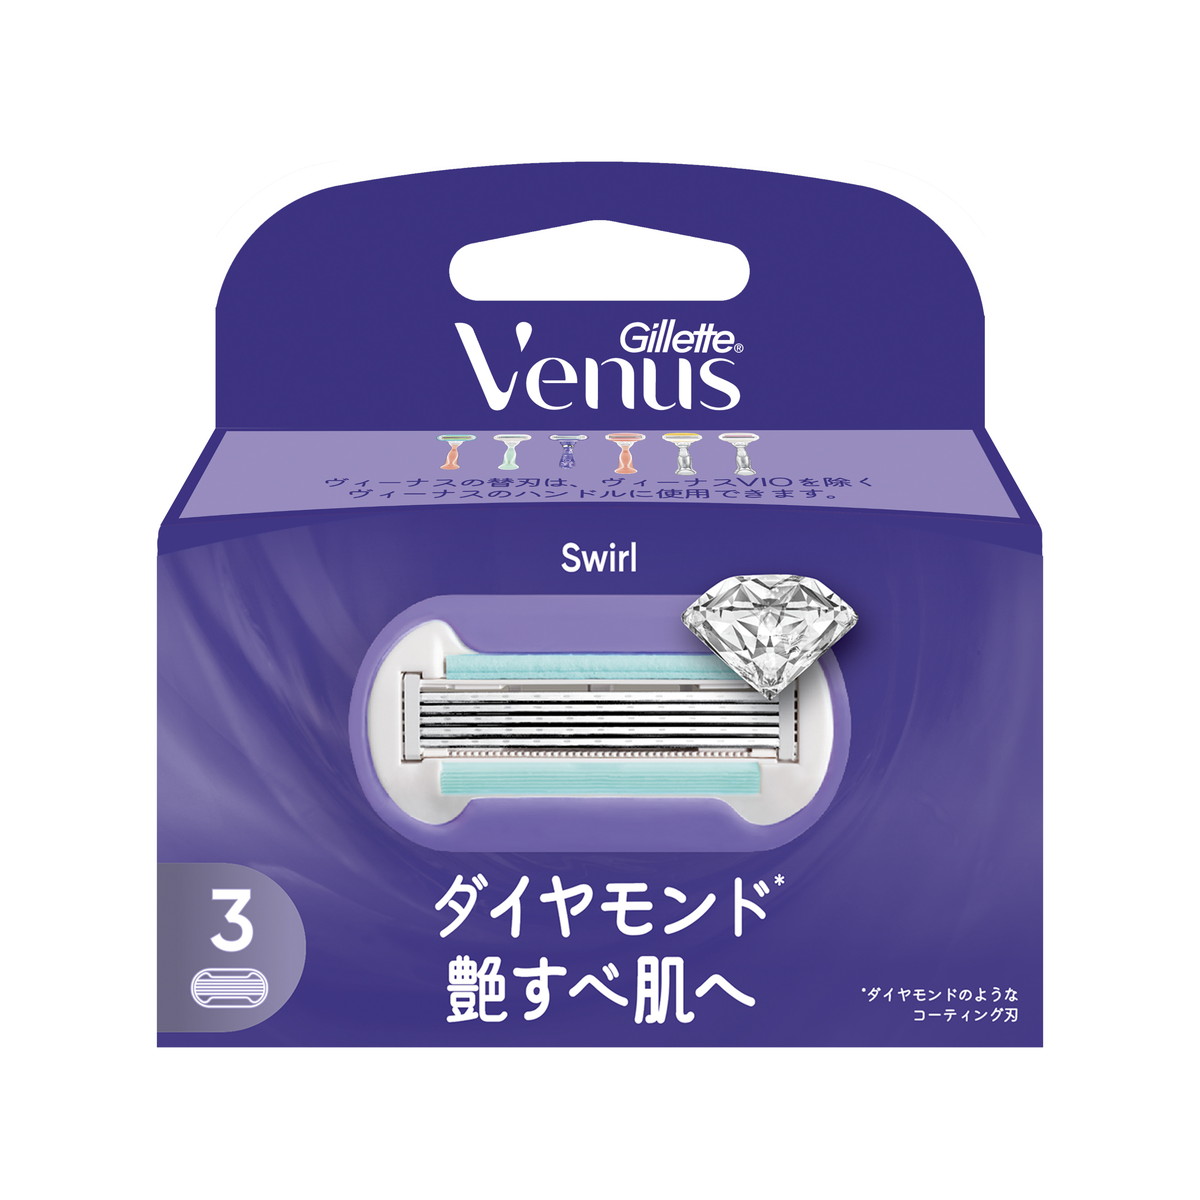 [... buying 2999 jpy and more free shipping ]P&amp;Gji let venus swirl gloss ...3B razor 3 piece insertion 